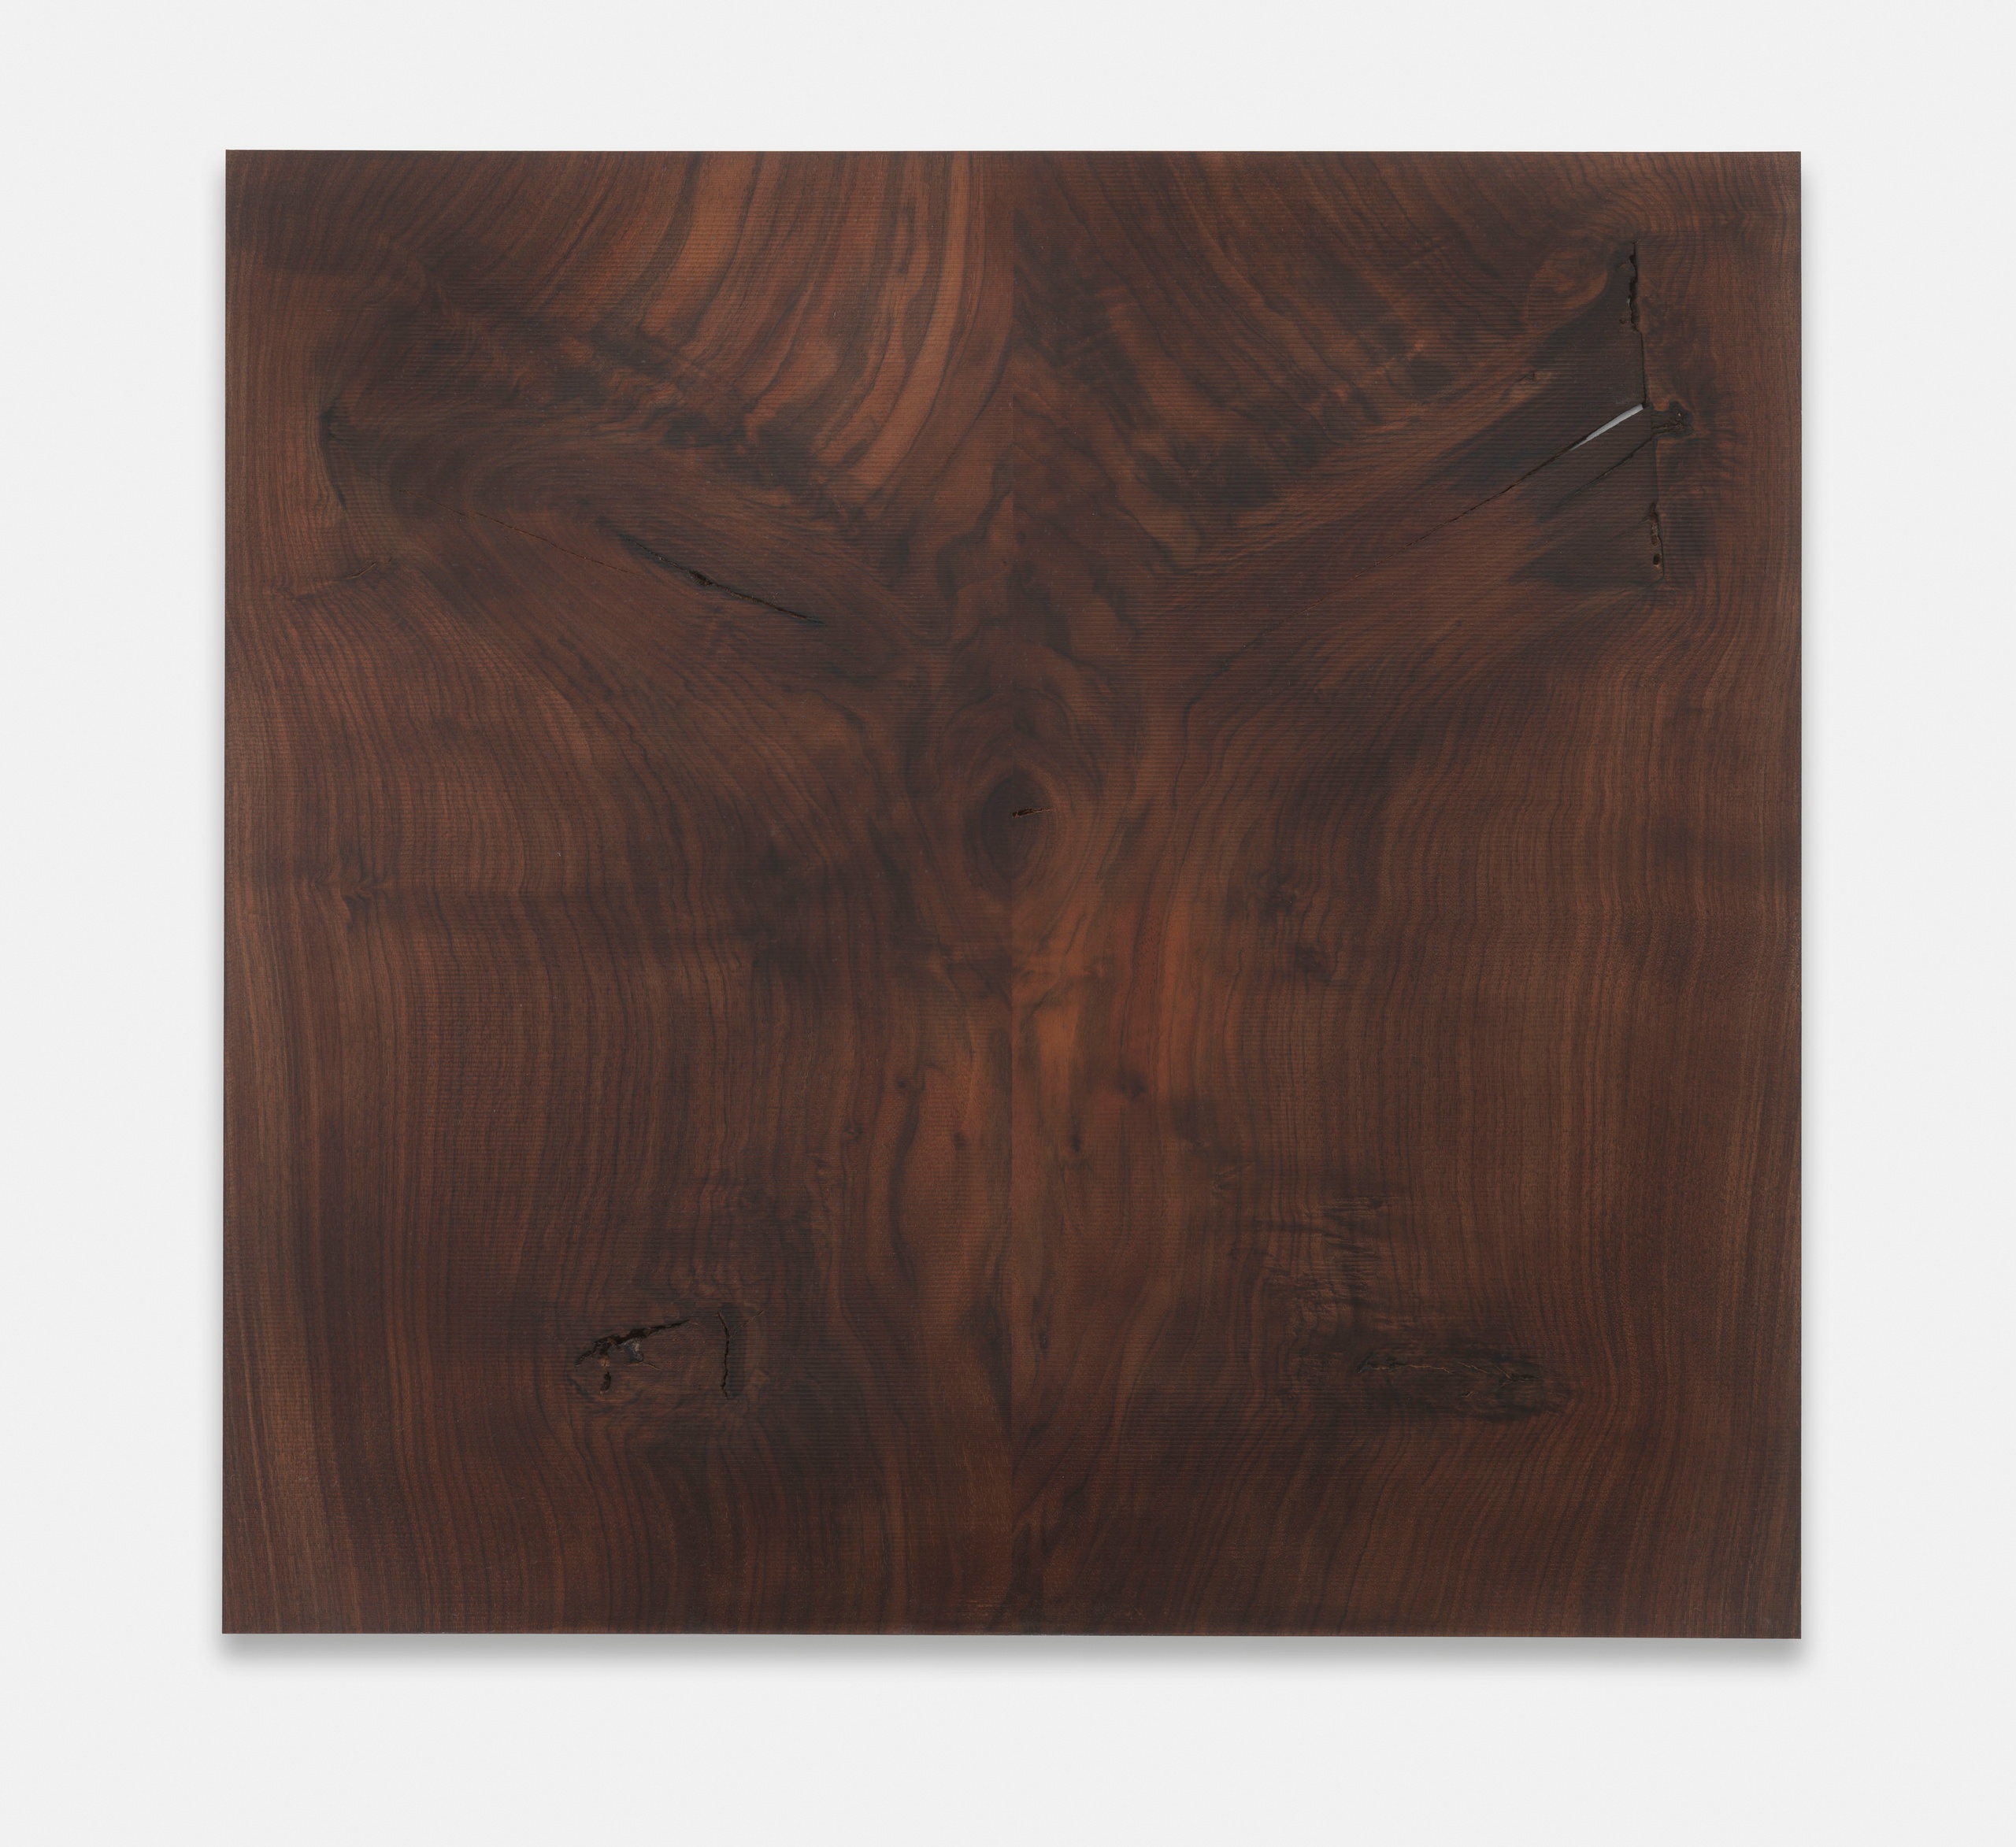 Beaux MendesEagle, 2023CNC-milled bookmatched claro walnut62 x 65 x 4 cm | 24 1/2 x 25 2/3 x 1 1/2 in